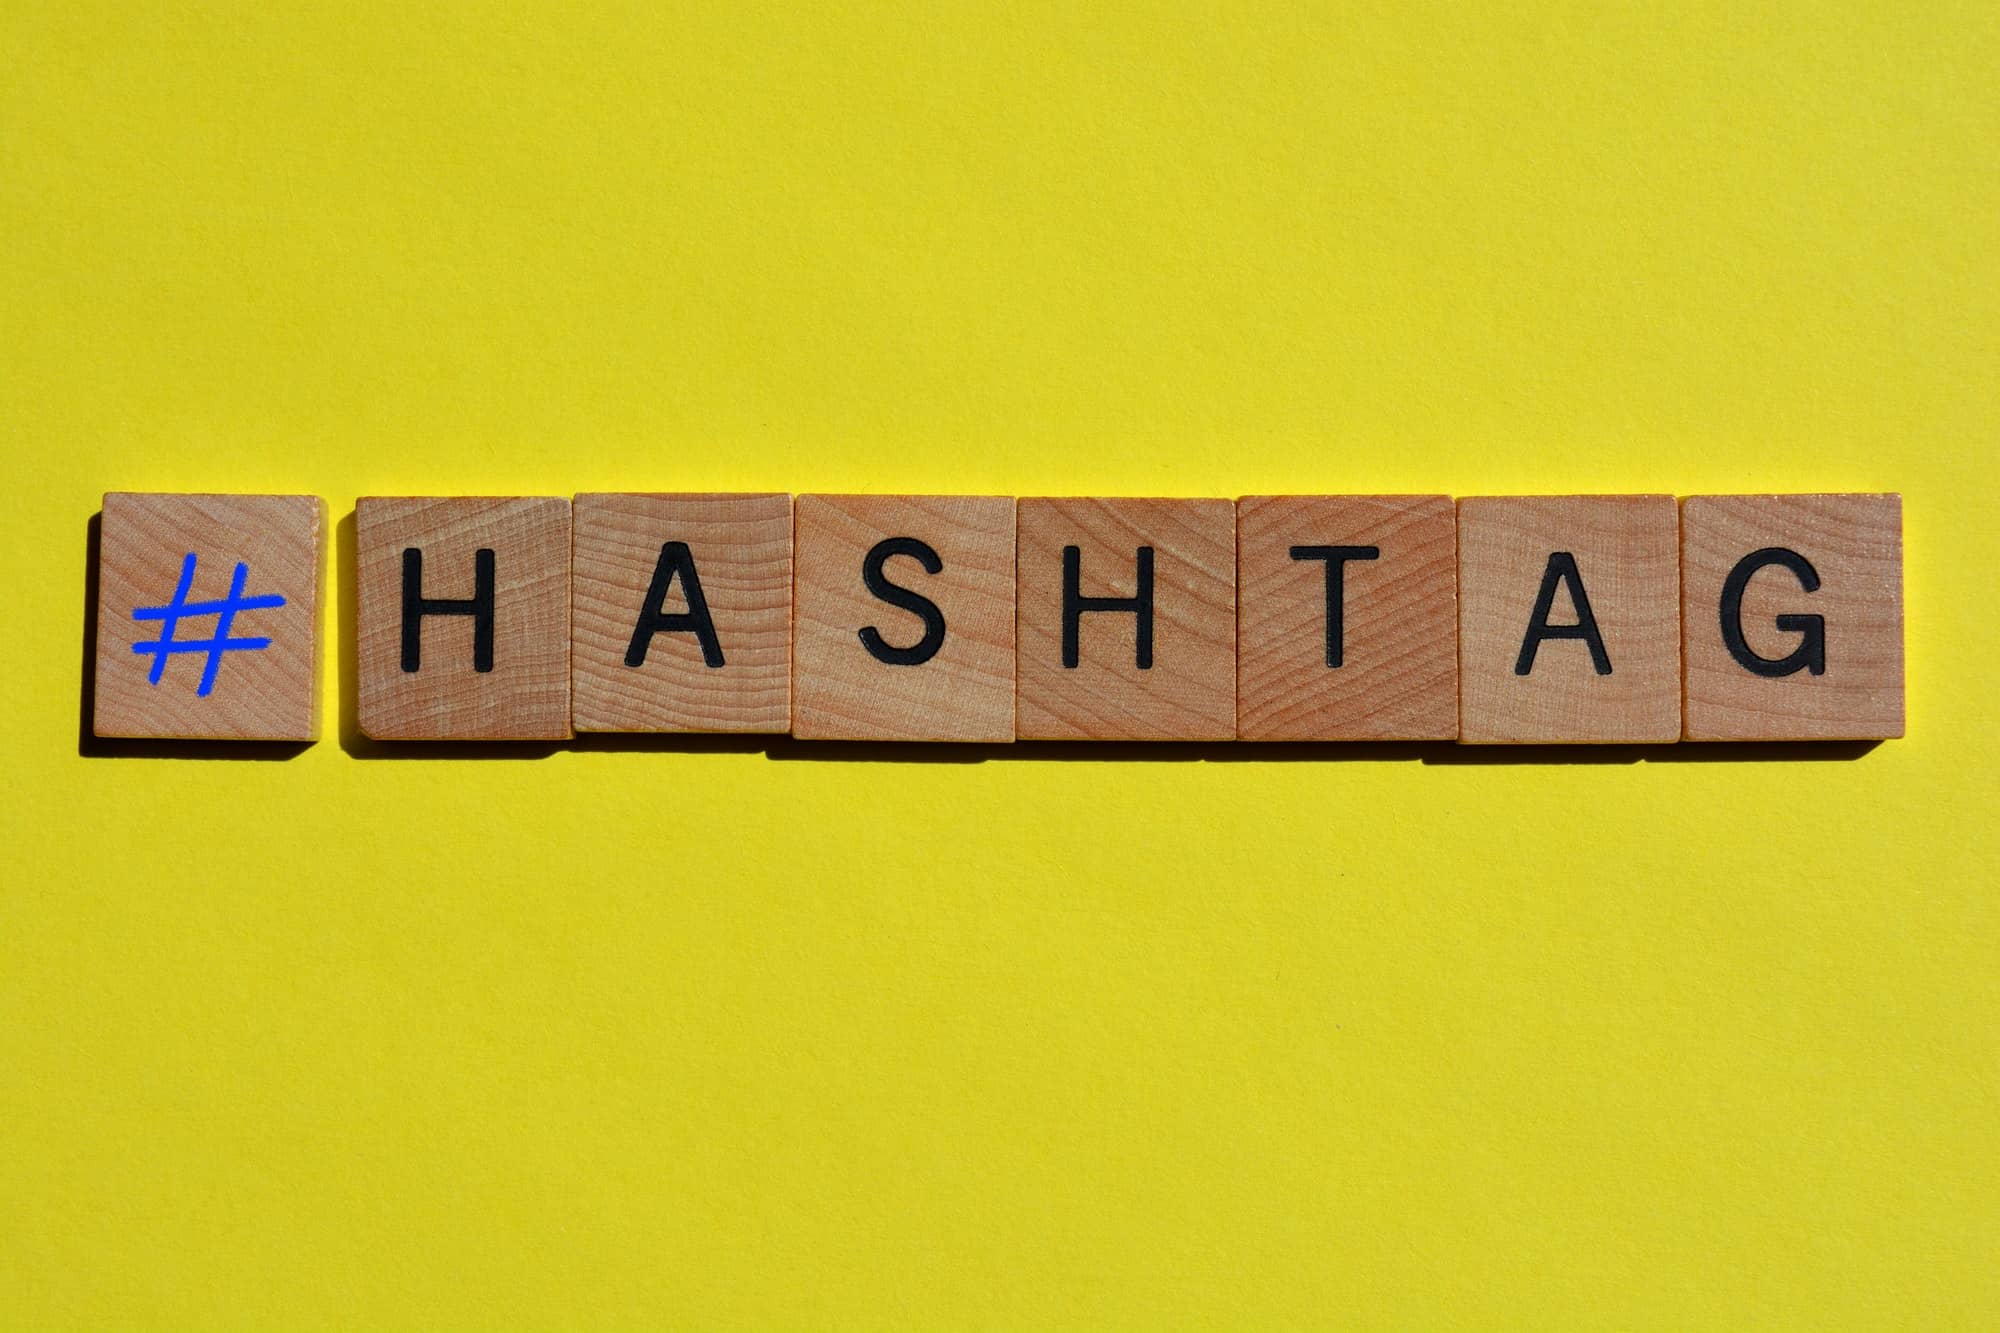 Hashtag, symbol and word as a banner headline with copy space